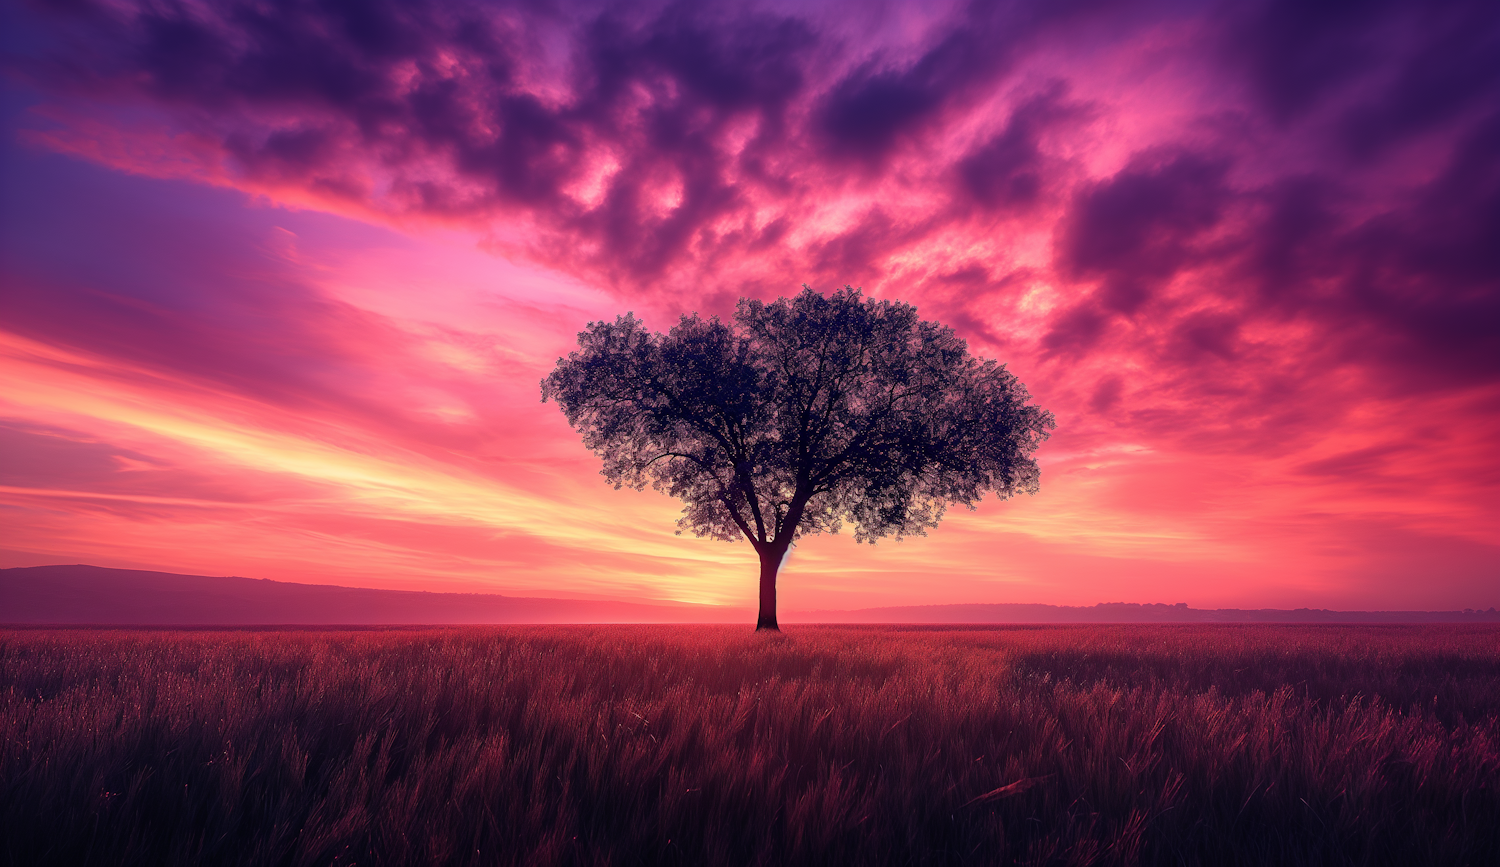 Twilight Serenity: The Resilient Tree